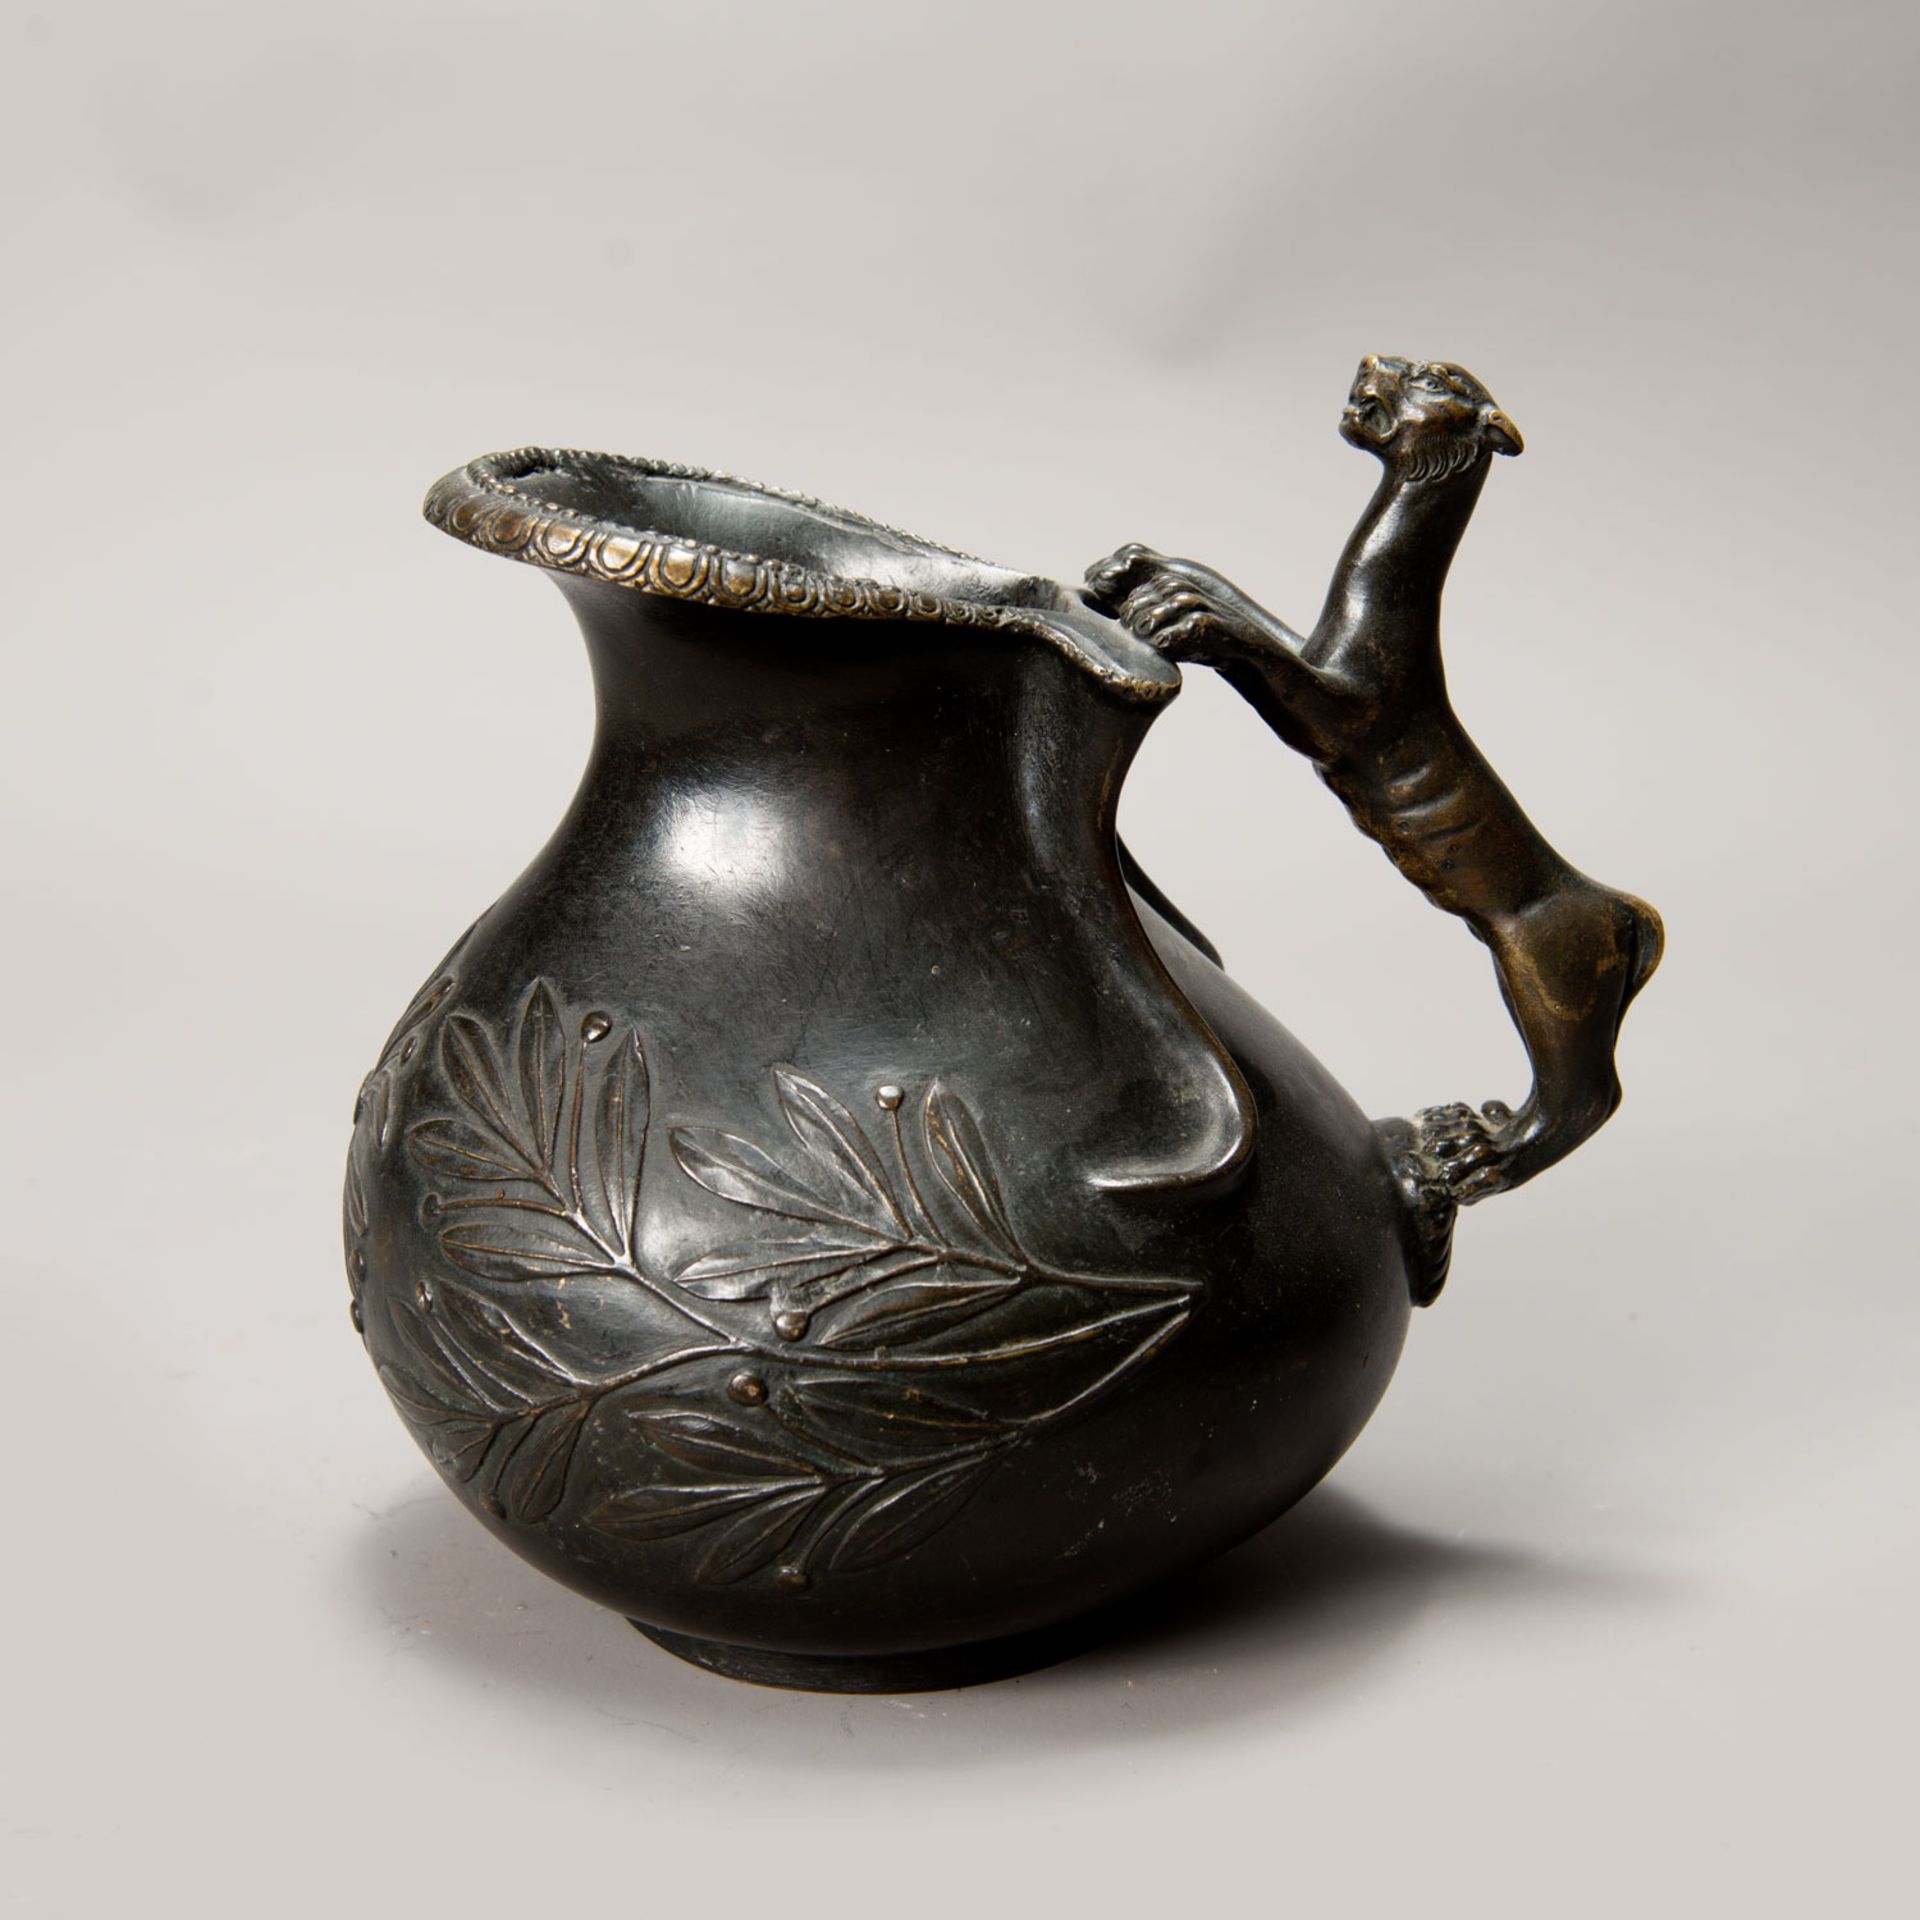 Bronze jug in Pompeian style - Image 2 of 3